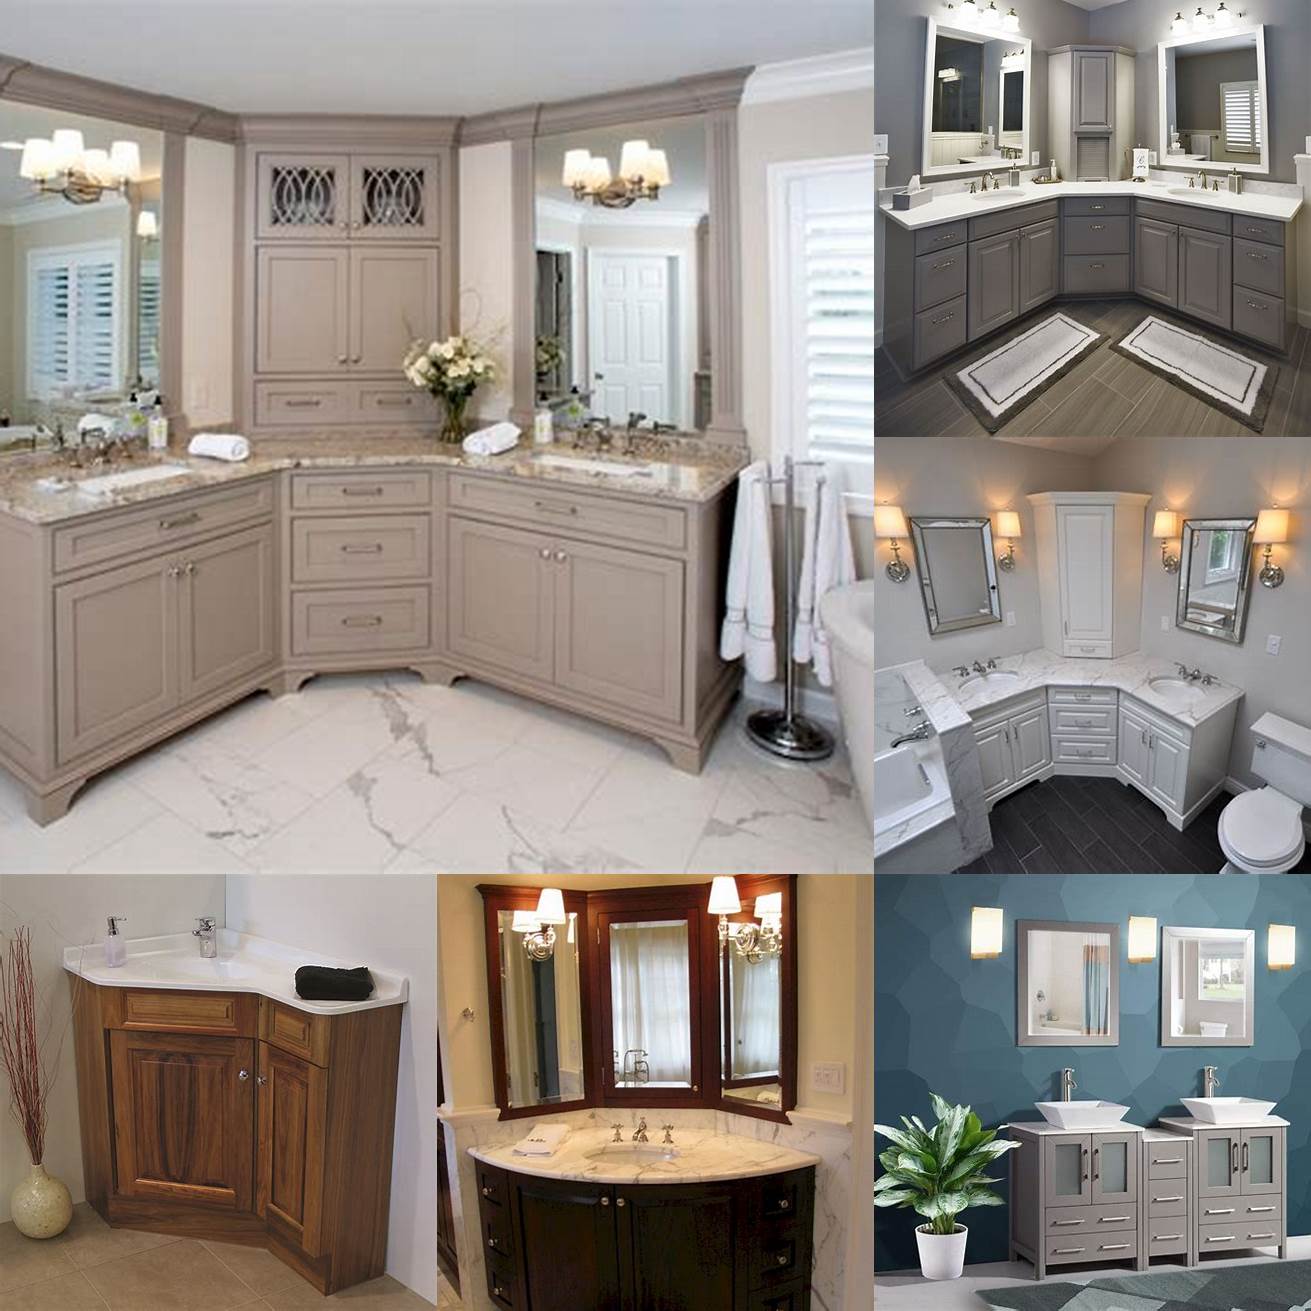 This corner bathroom vanity set includes a double sink for added functionality